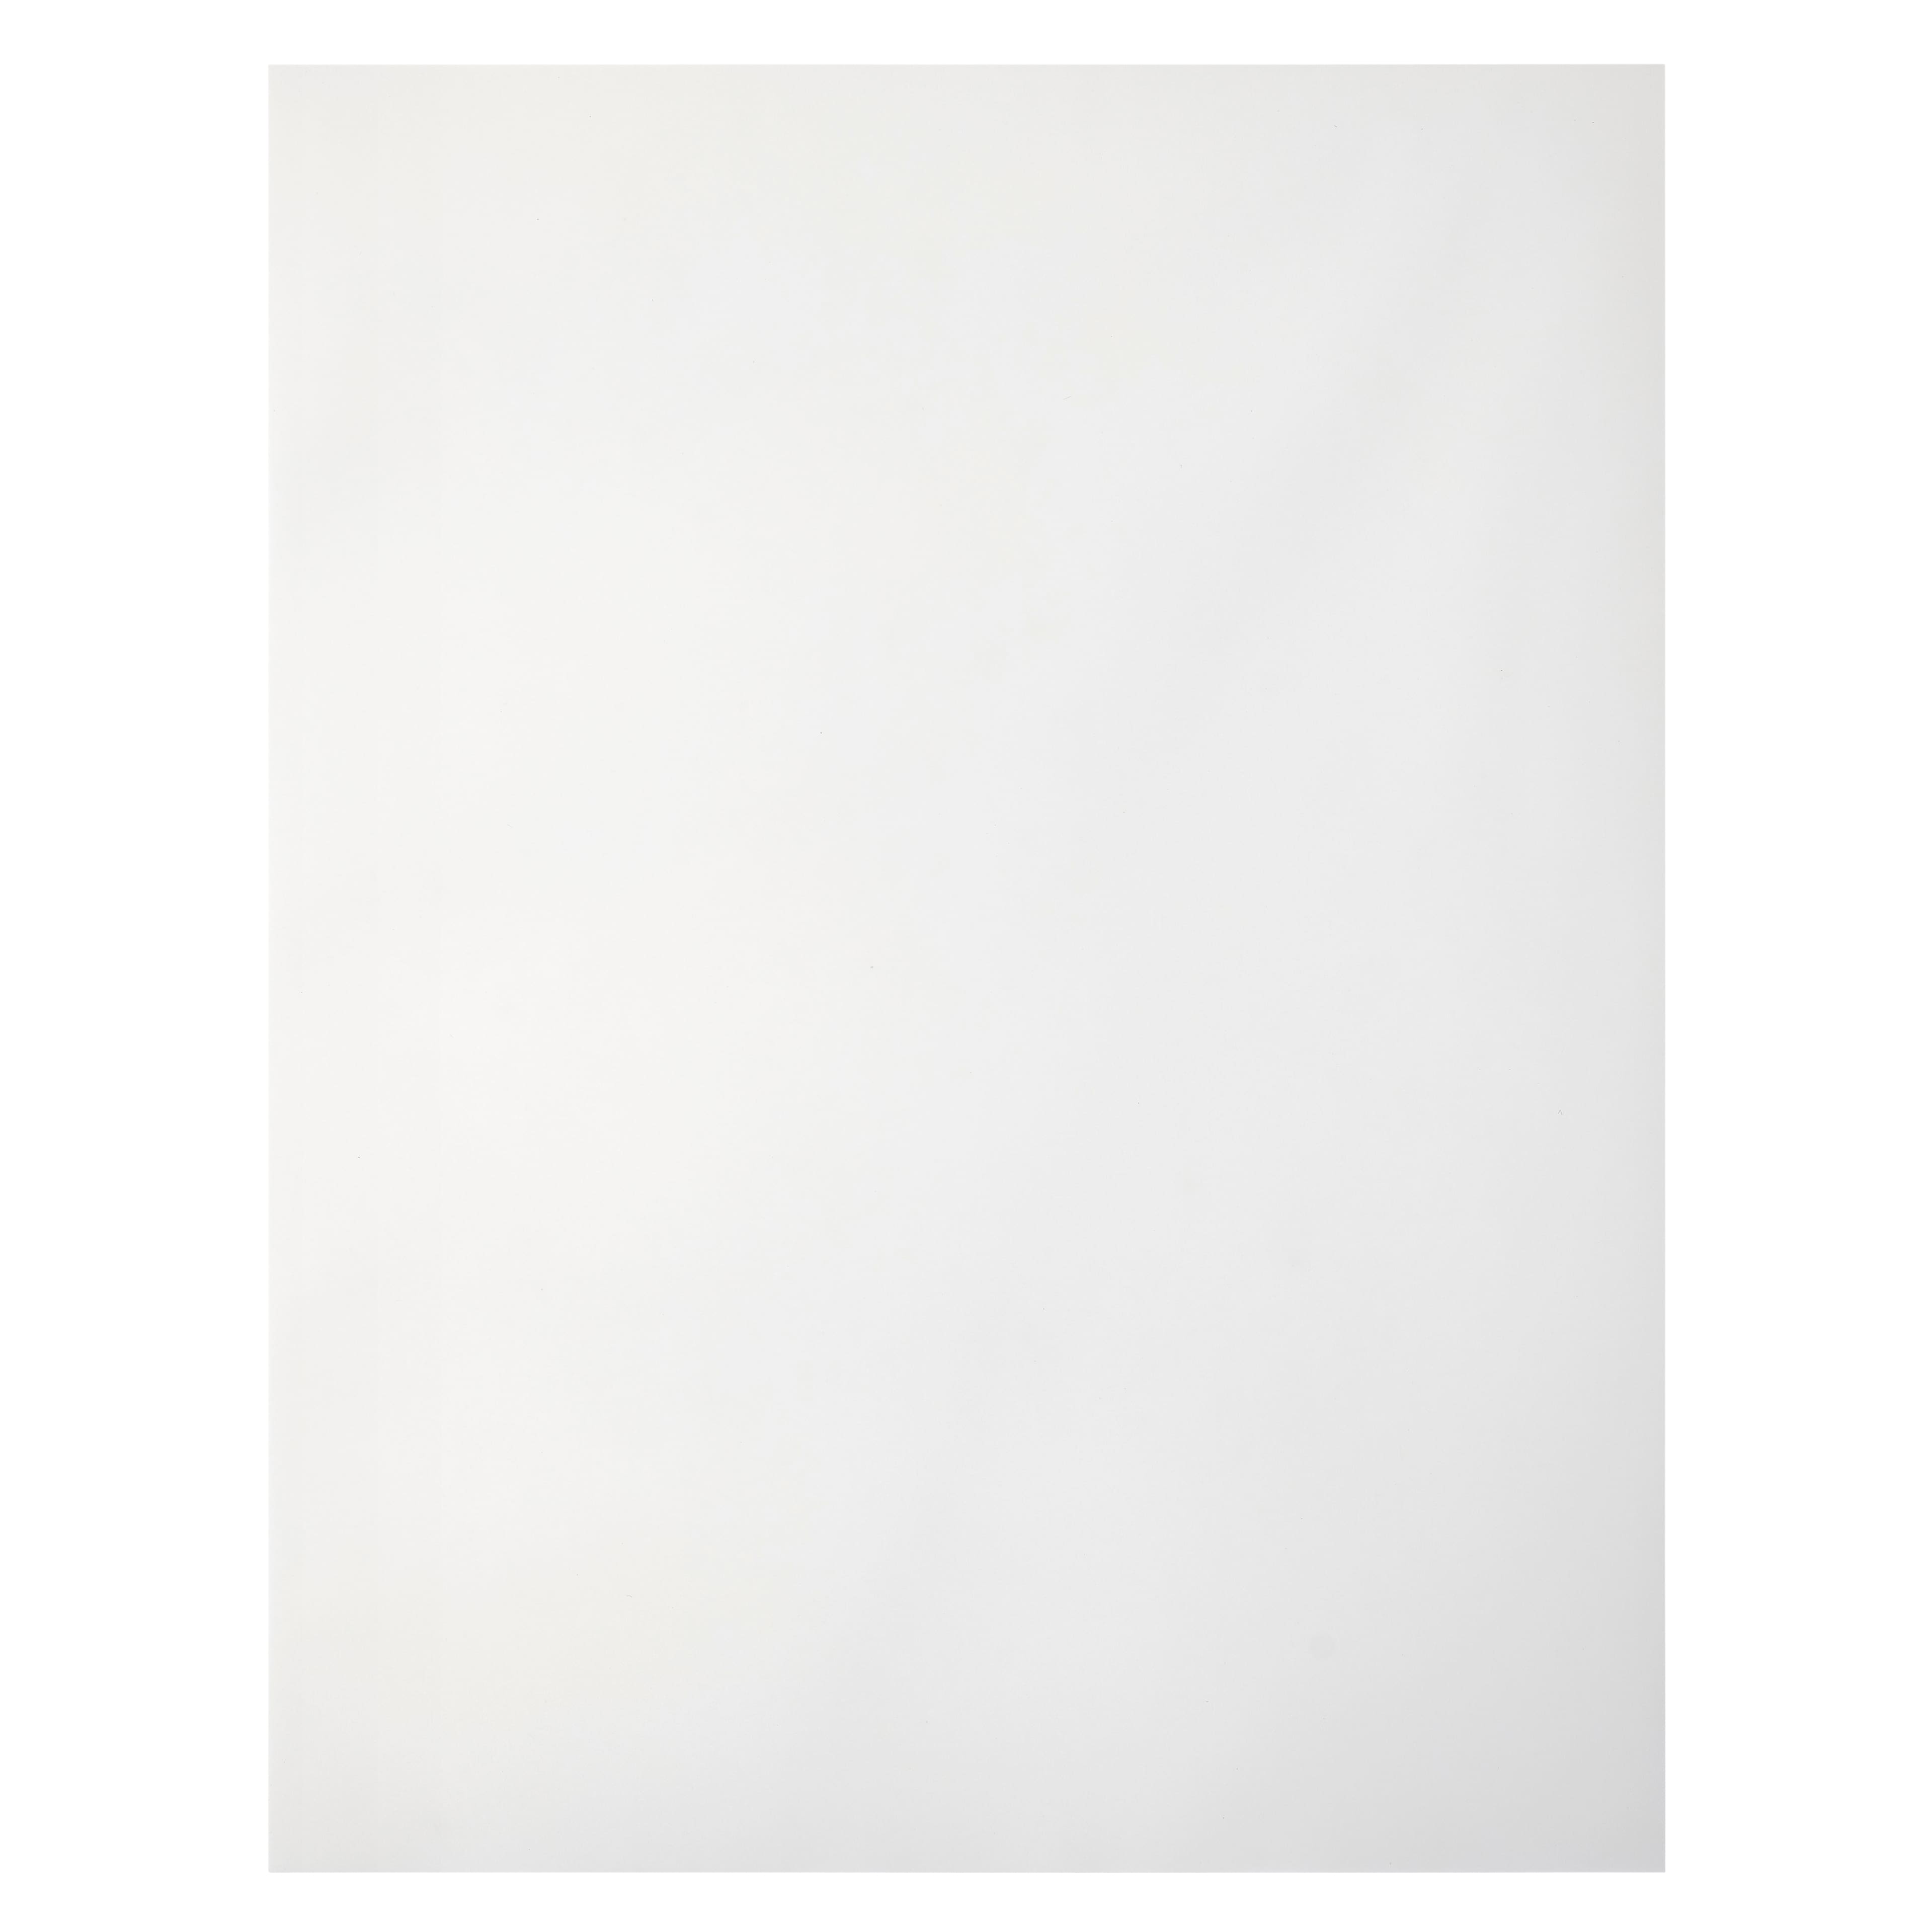 12 Packs: 40 ct. (480 total) Clear 8.5&#x22; x 11&#x22; Vellum Paper by Recollections&#x2122;